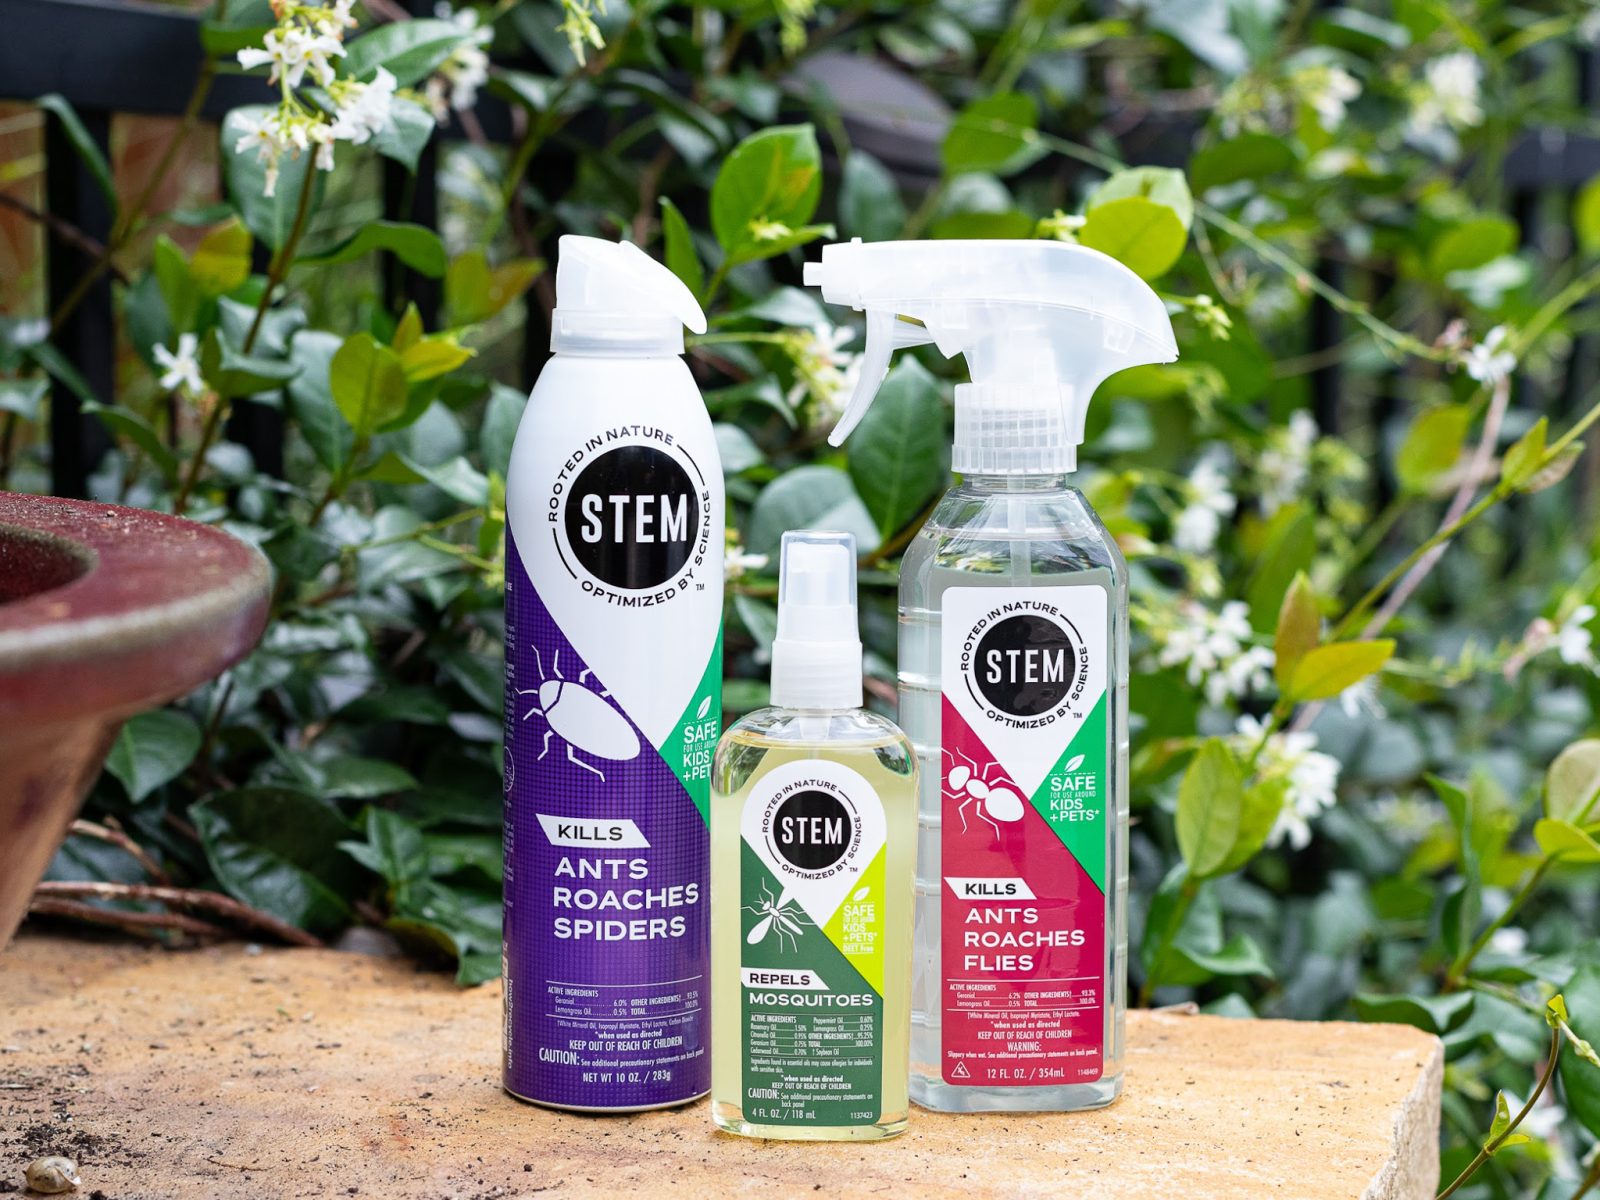 Look For STEM® Products Buy One, Get One FREE At Publix!